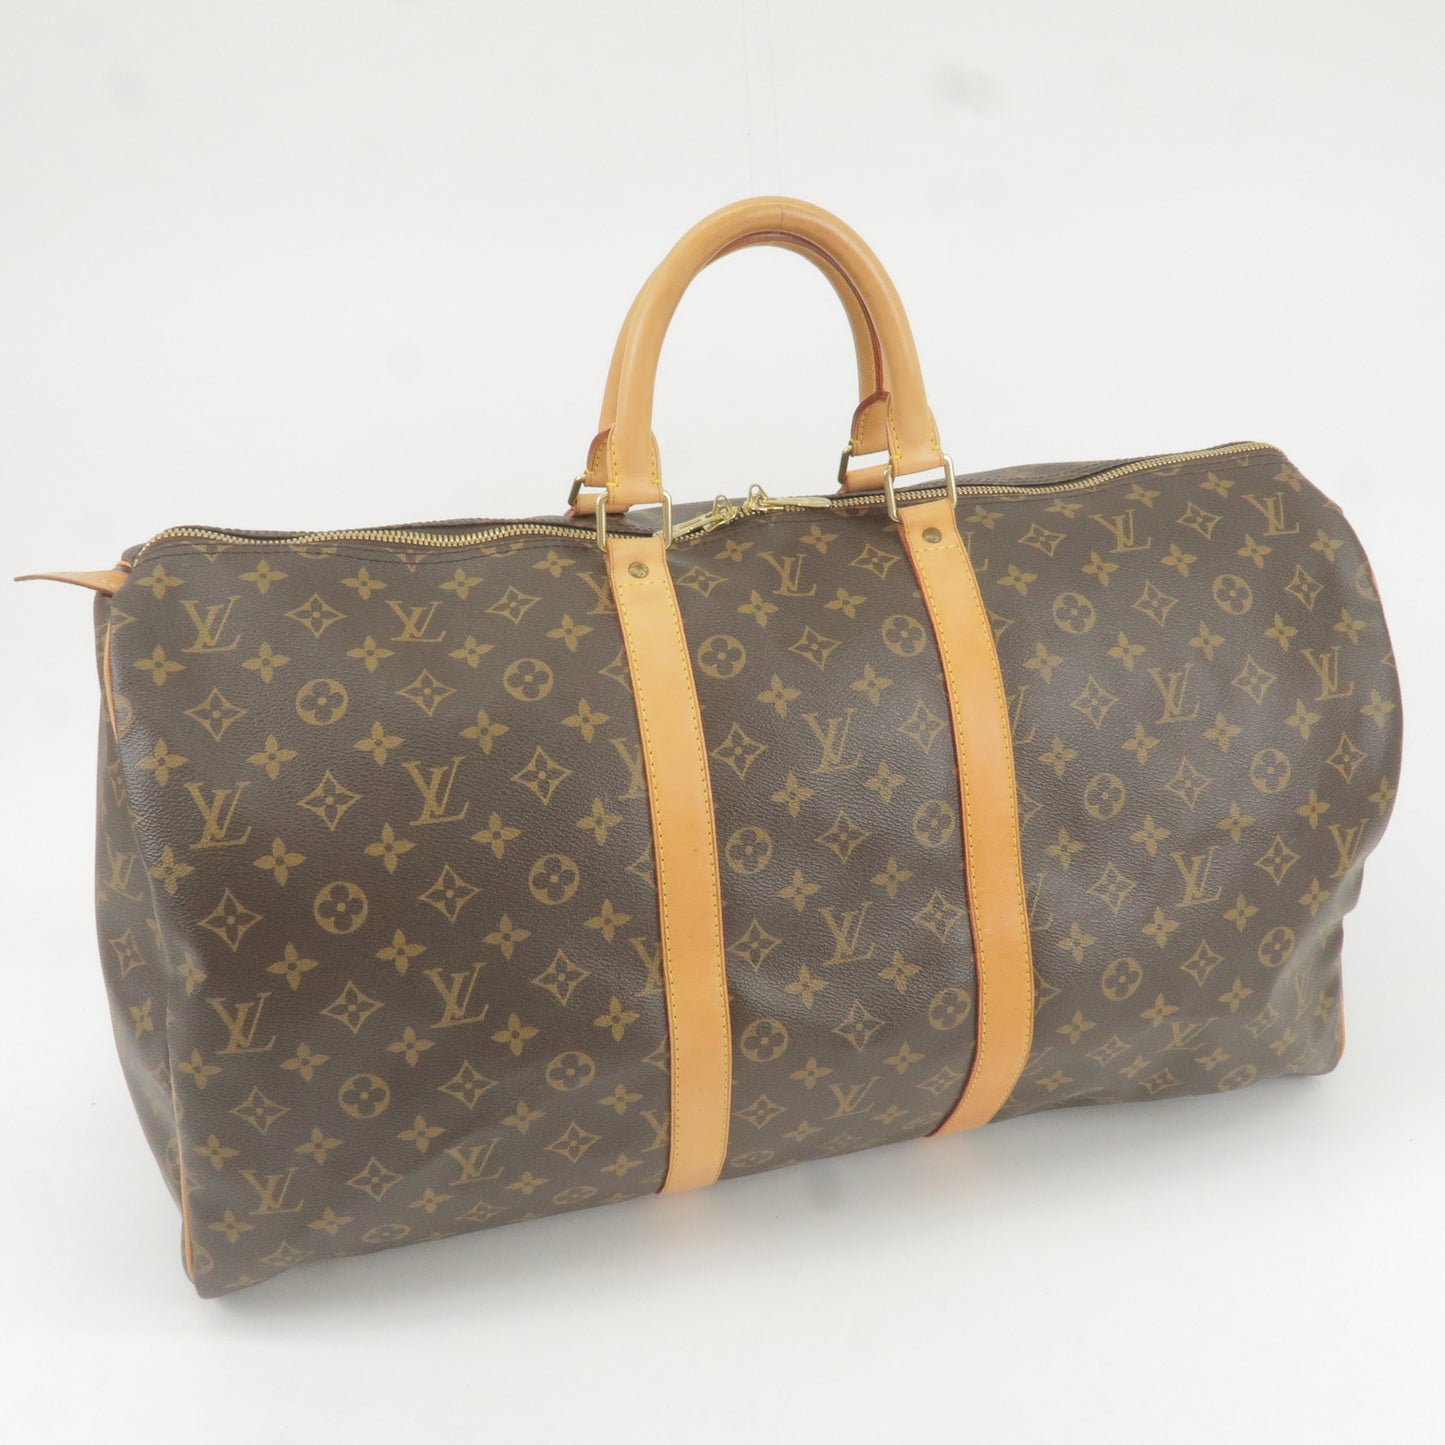 Louis Vuitton Keepall 55 Duffel in Damier Infini Leather with original  receipt